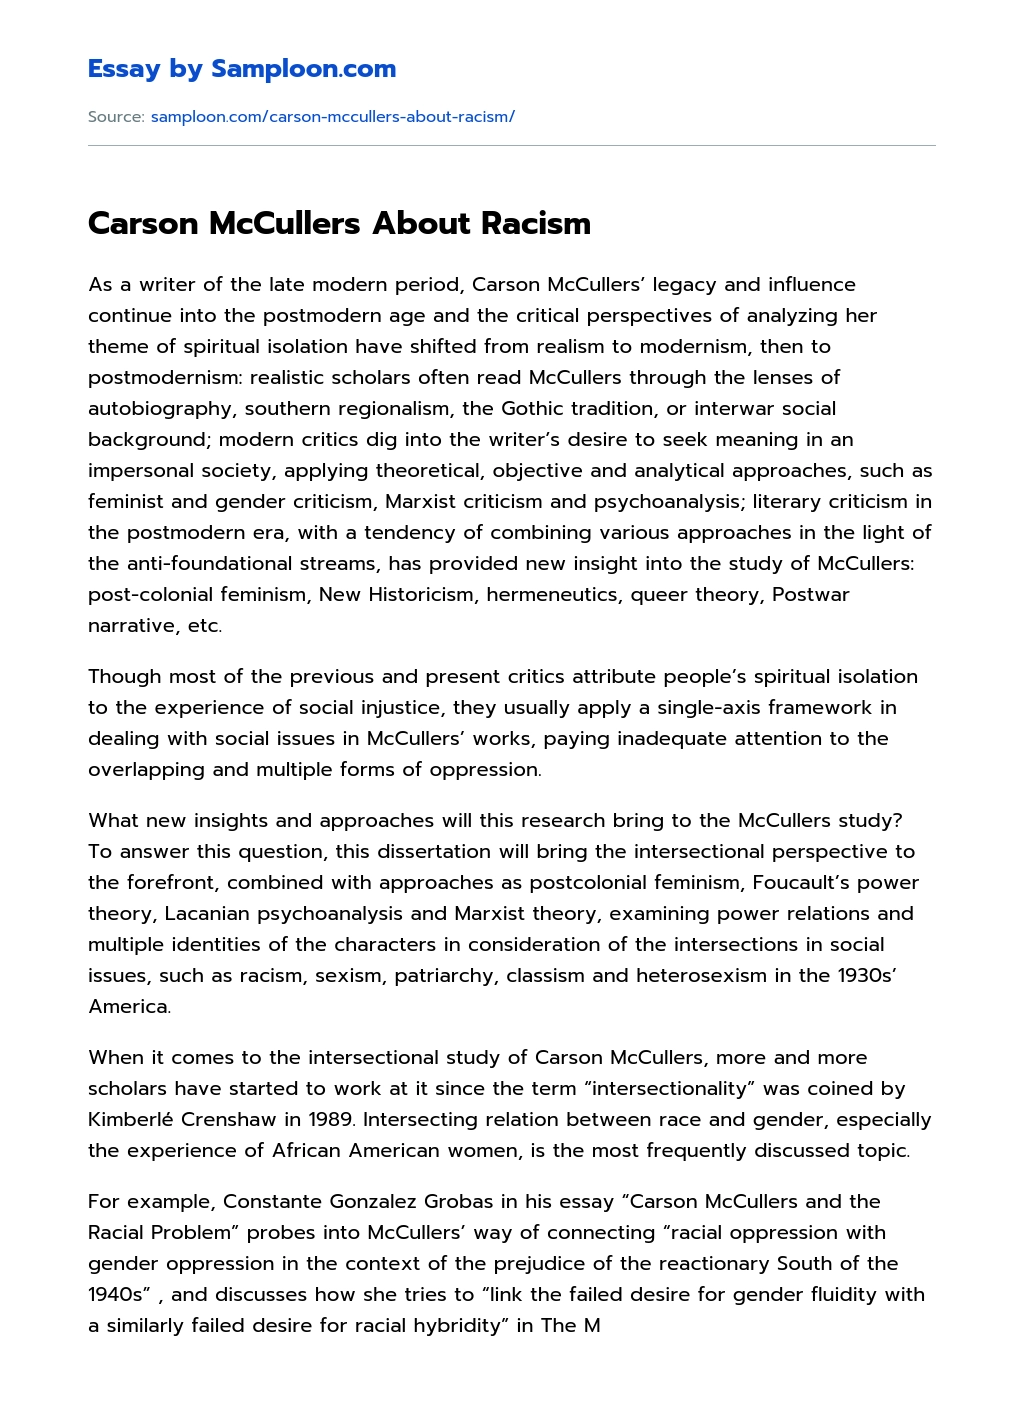 Carson McCullers About Racism essay